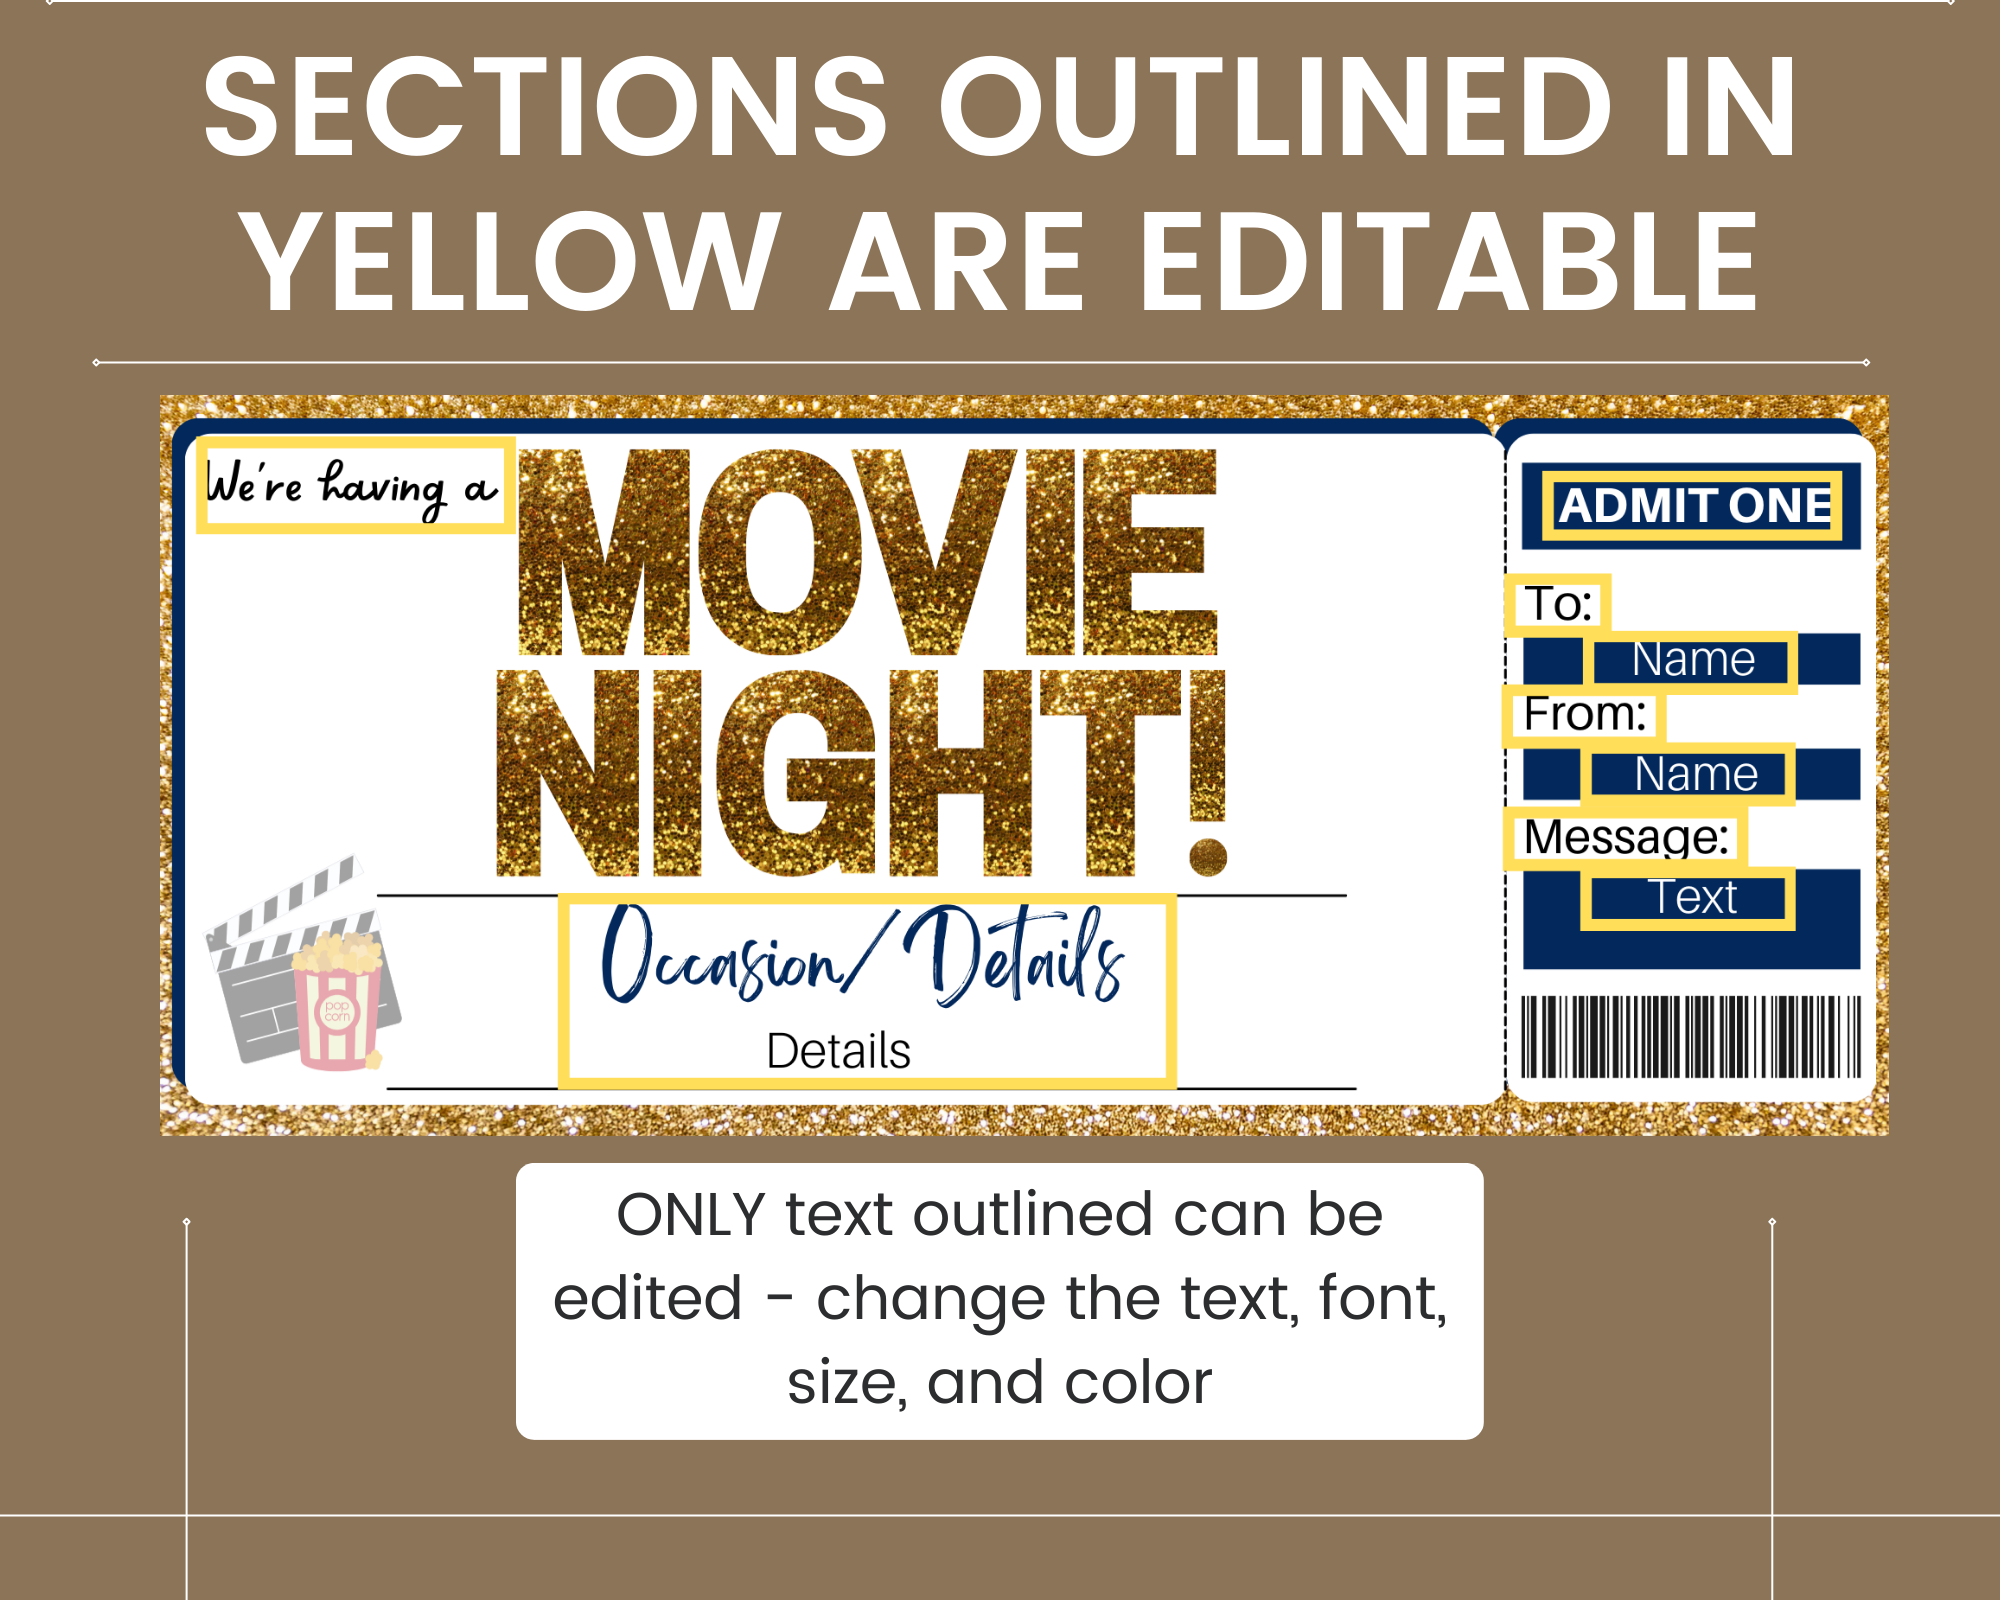 Movie Pass Gift Certificate: Free Printable for Gift Subscriptions